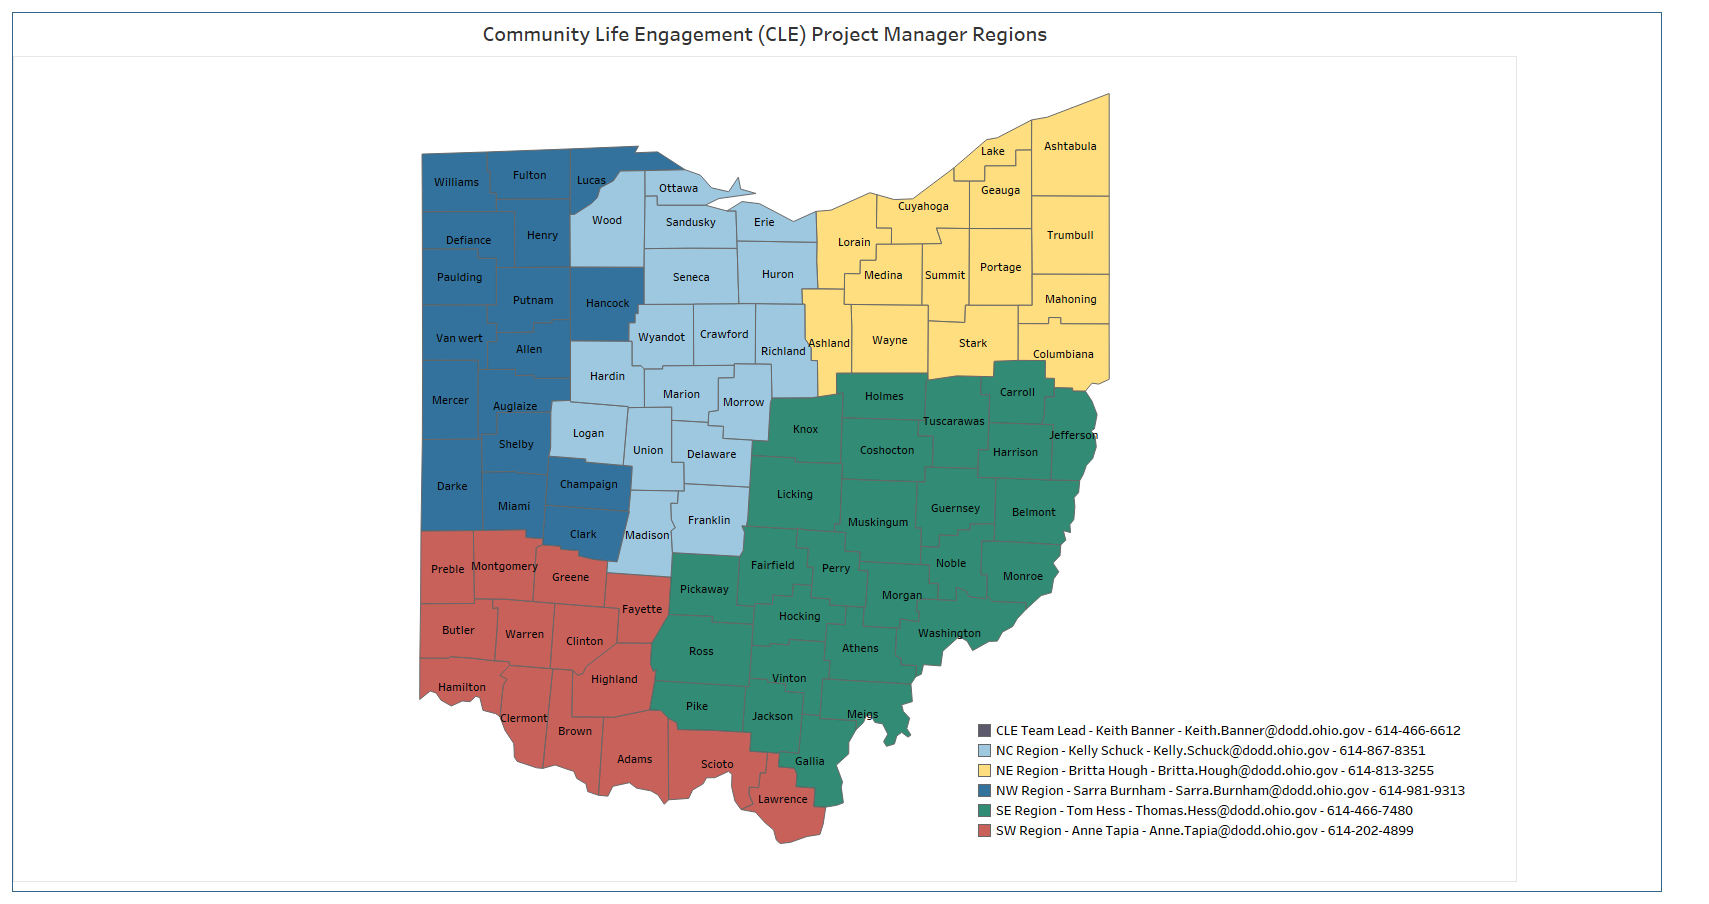 Community Life Engagement (CLE) Project Manager Regions